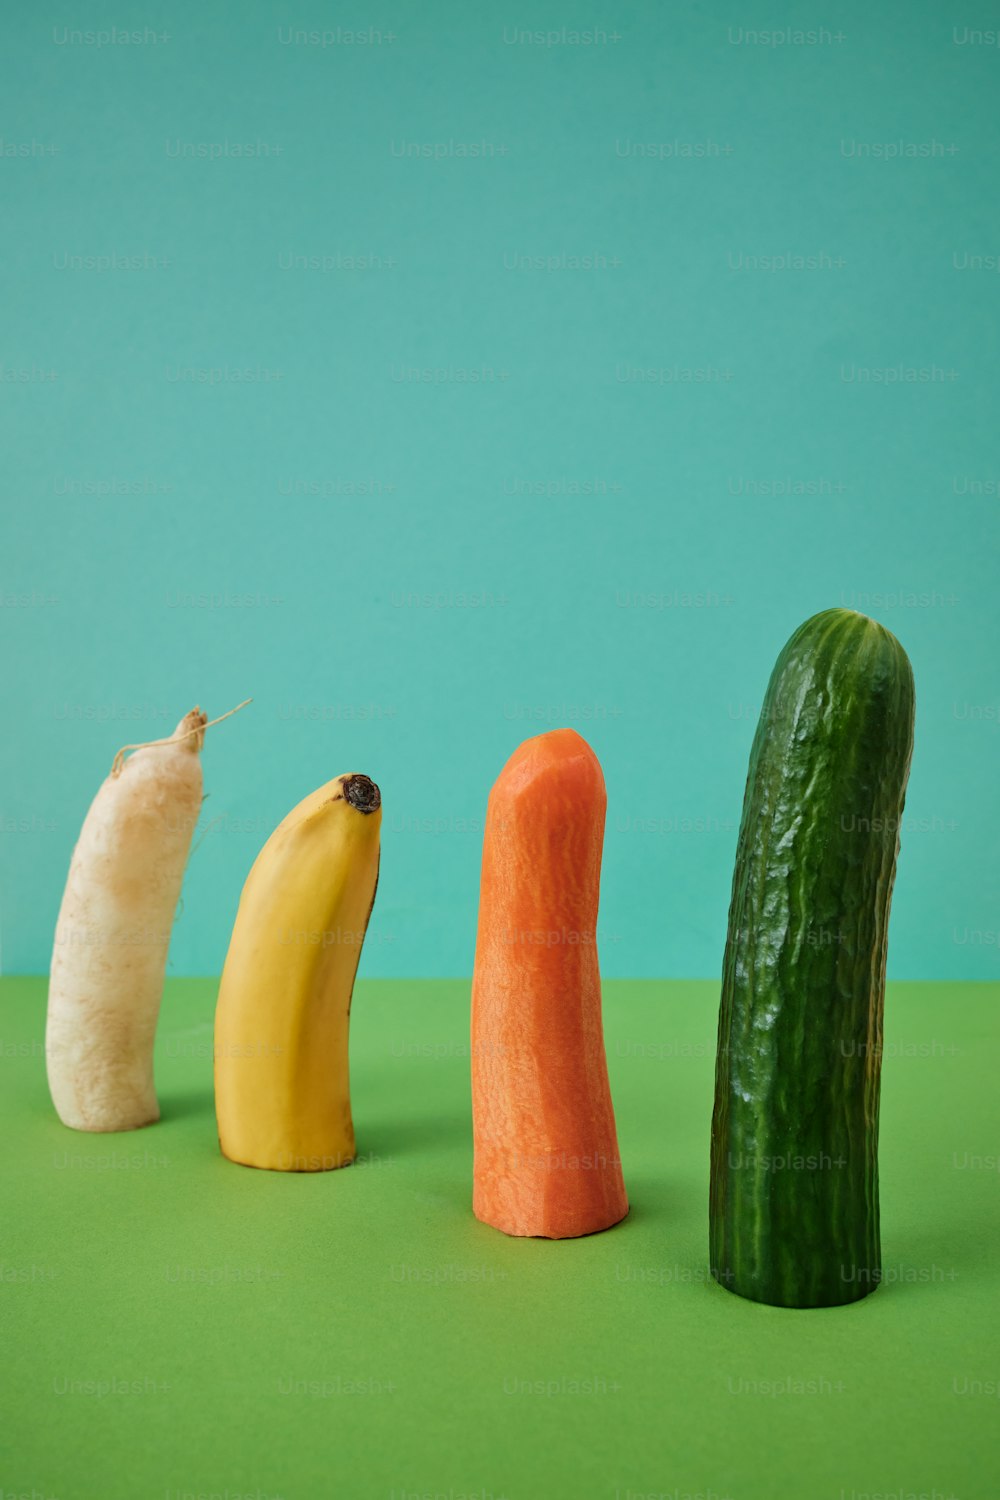 a cucumber, banana, and carrot are arranged in a row